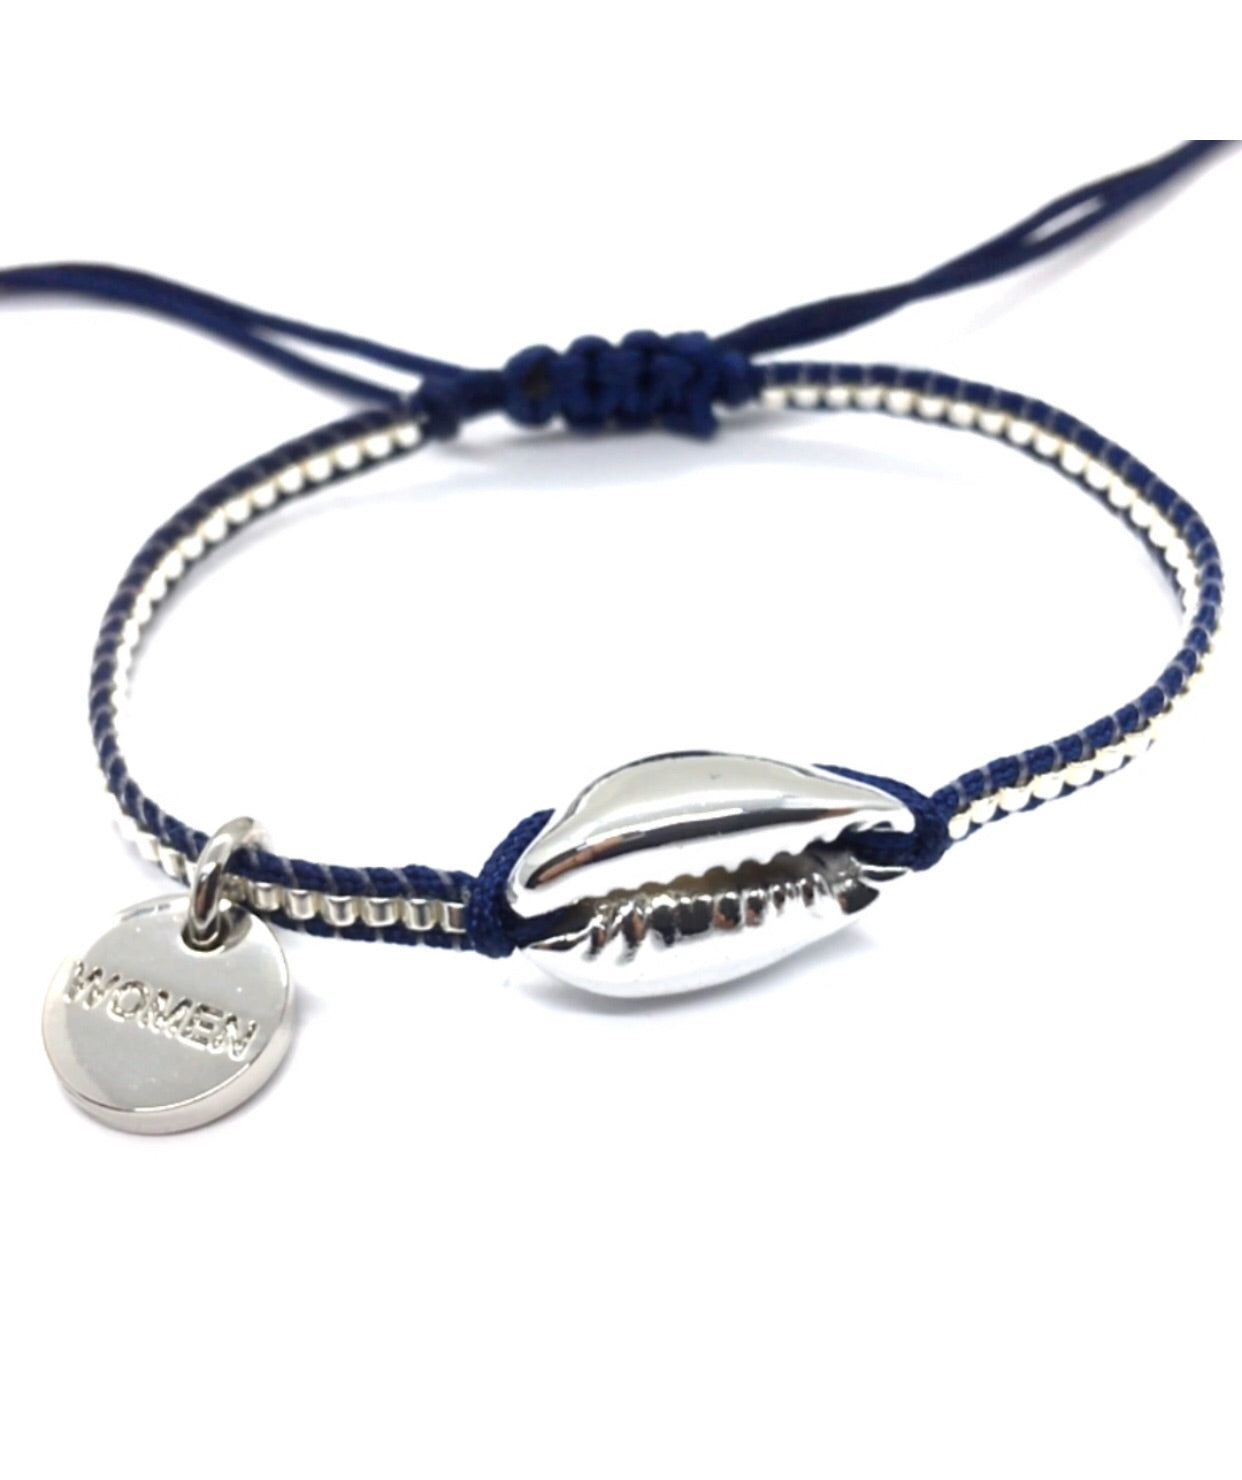 Silver shell bracelet, with silver Miyuki beads, and dark blue cord